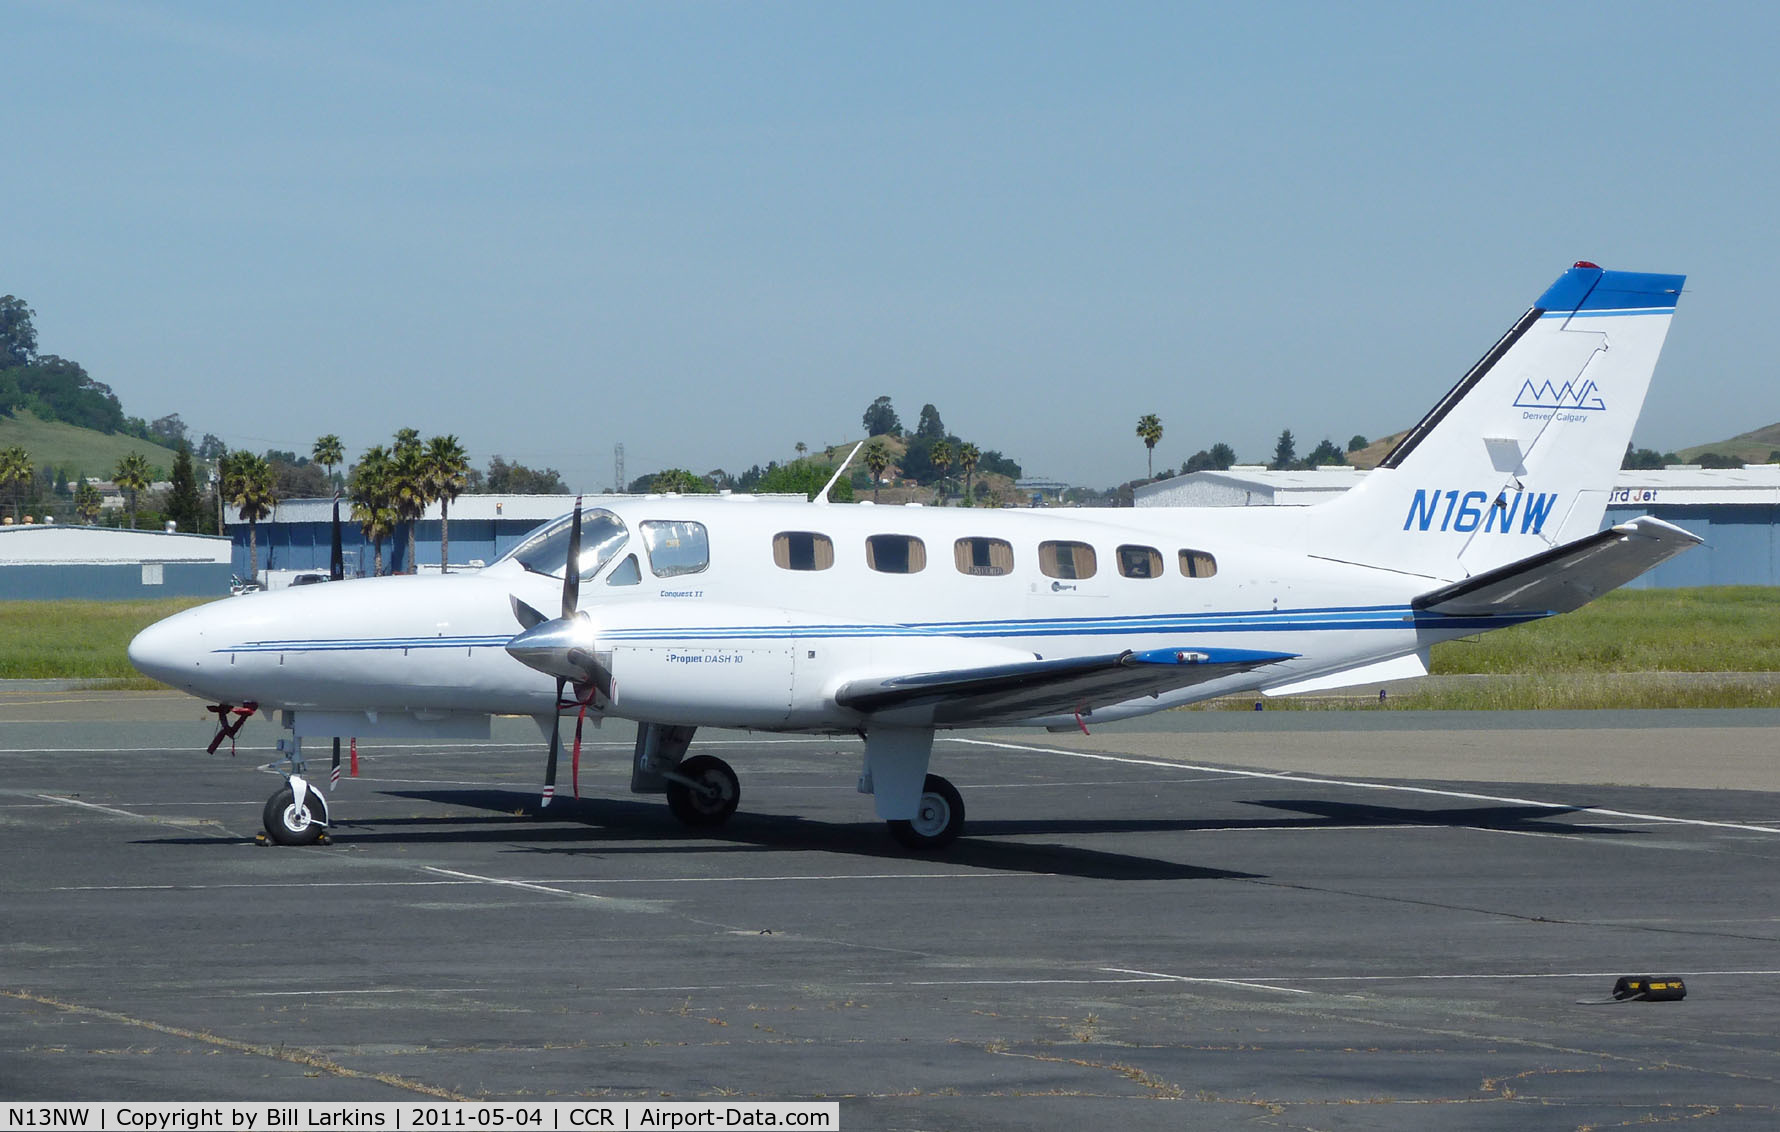 N13NW, 1979 Cessna 441 Conquest II C/N 441-0090, Visitor